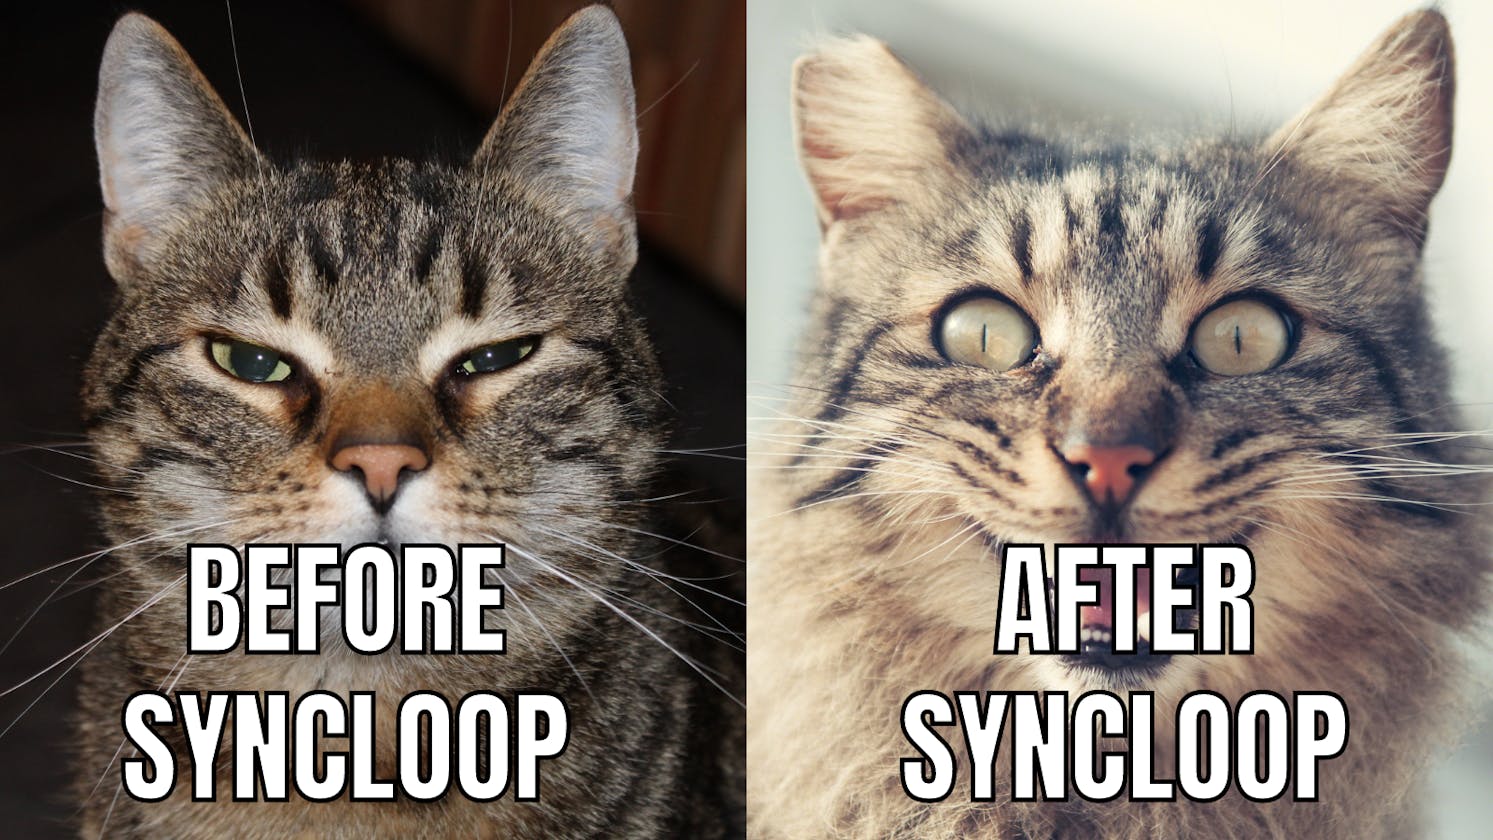 Making API development faster with Syncloop